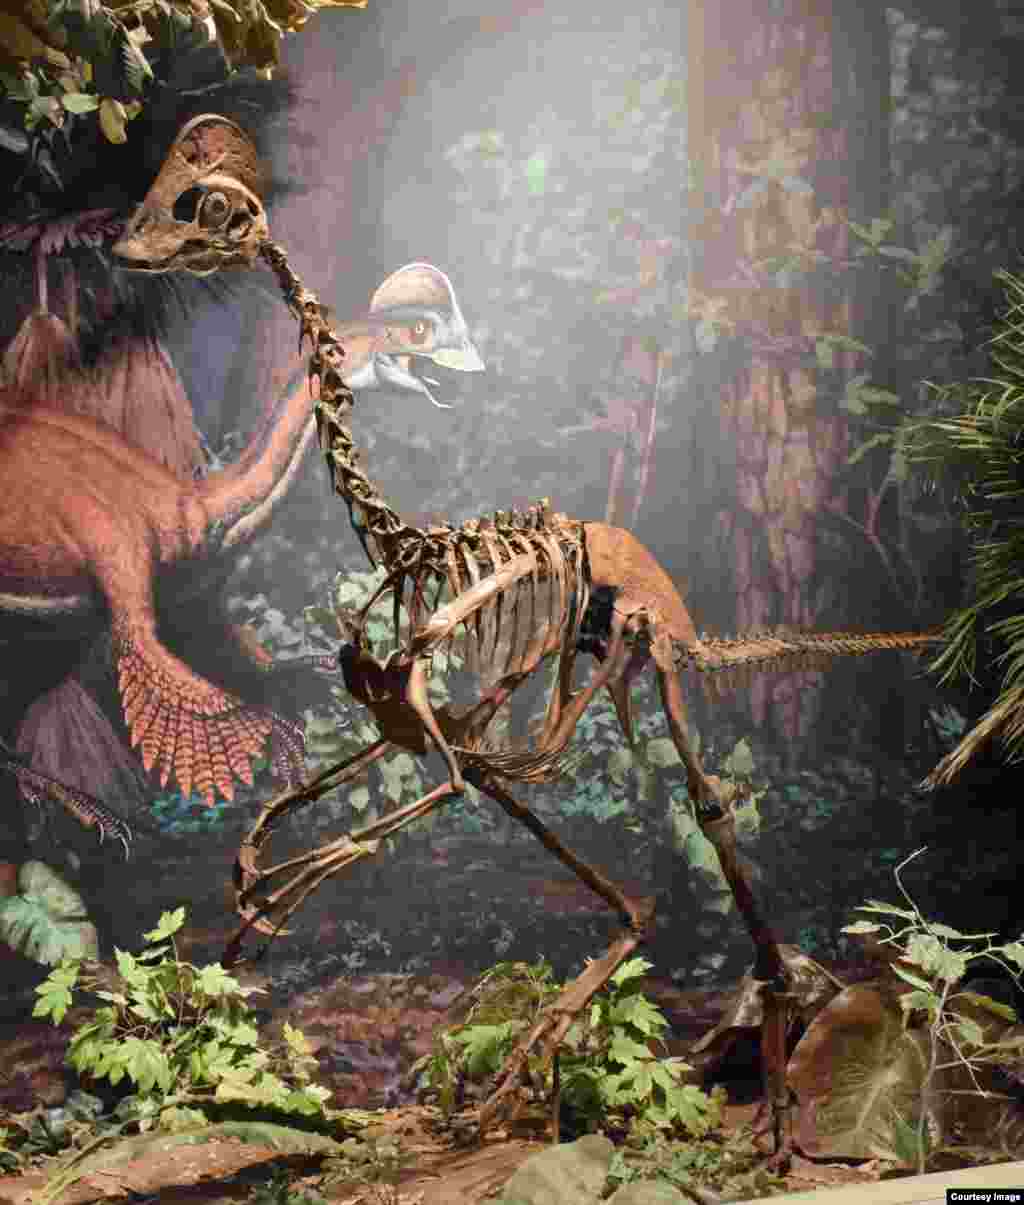 This new dinosaur, dubbed the &ldquo;chicken from Hell,&rdquo; was a contemporary of the more famous T. rex. Three well-preserved partial Anzu wyliei skeletons were discovered in North and South Dakota, in the Hell Creek Formation. The bird-like dinosaur stood 1.5 meters high, was 3.5 meters from beak to tail, and weighed as much as 300 kilos. (Carnegie Museum of Natural History)